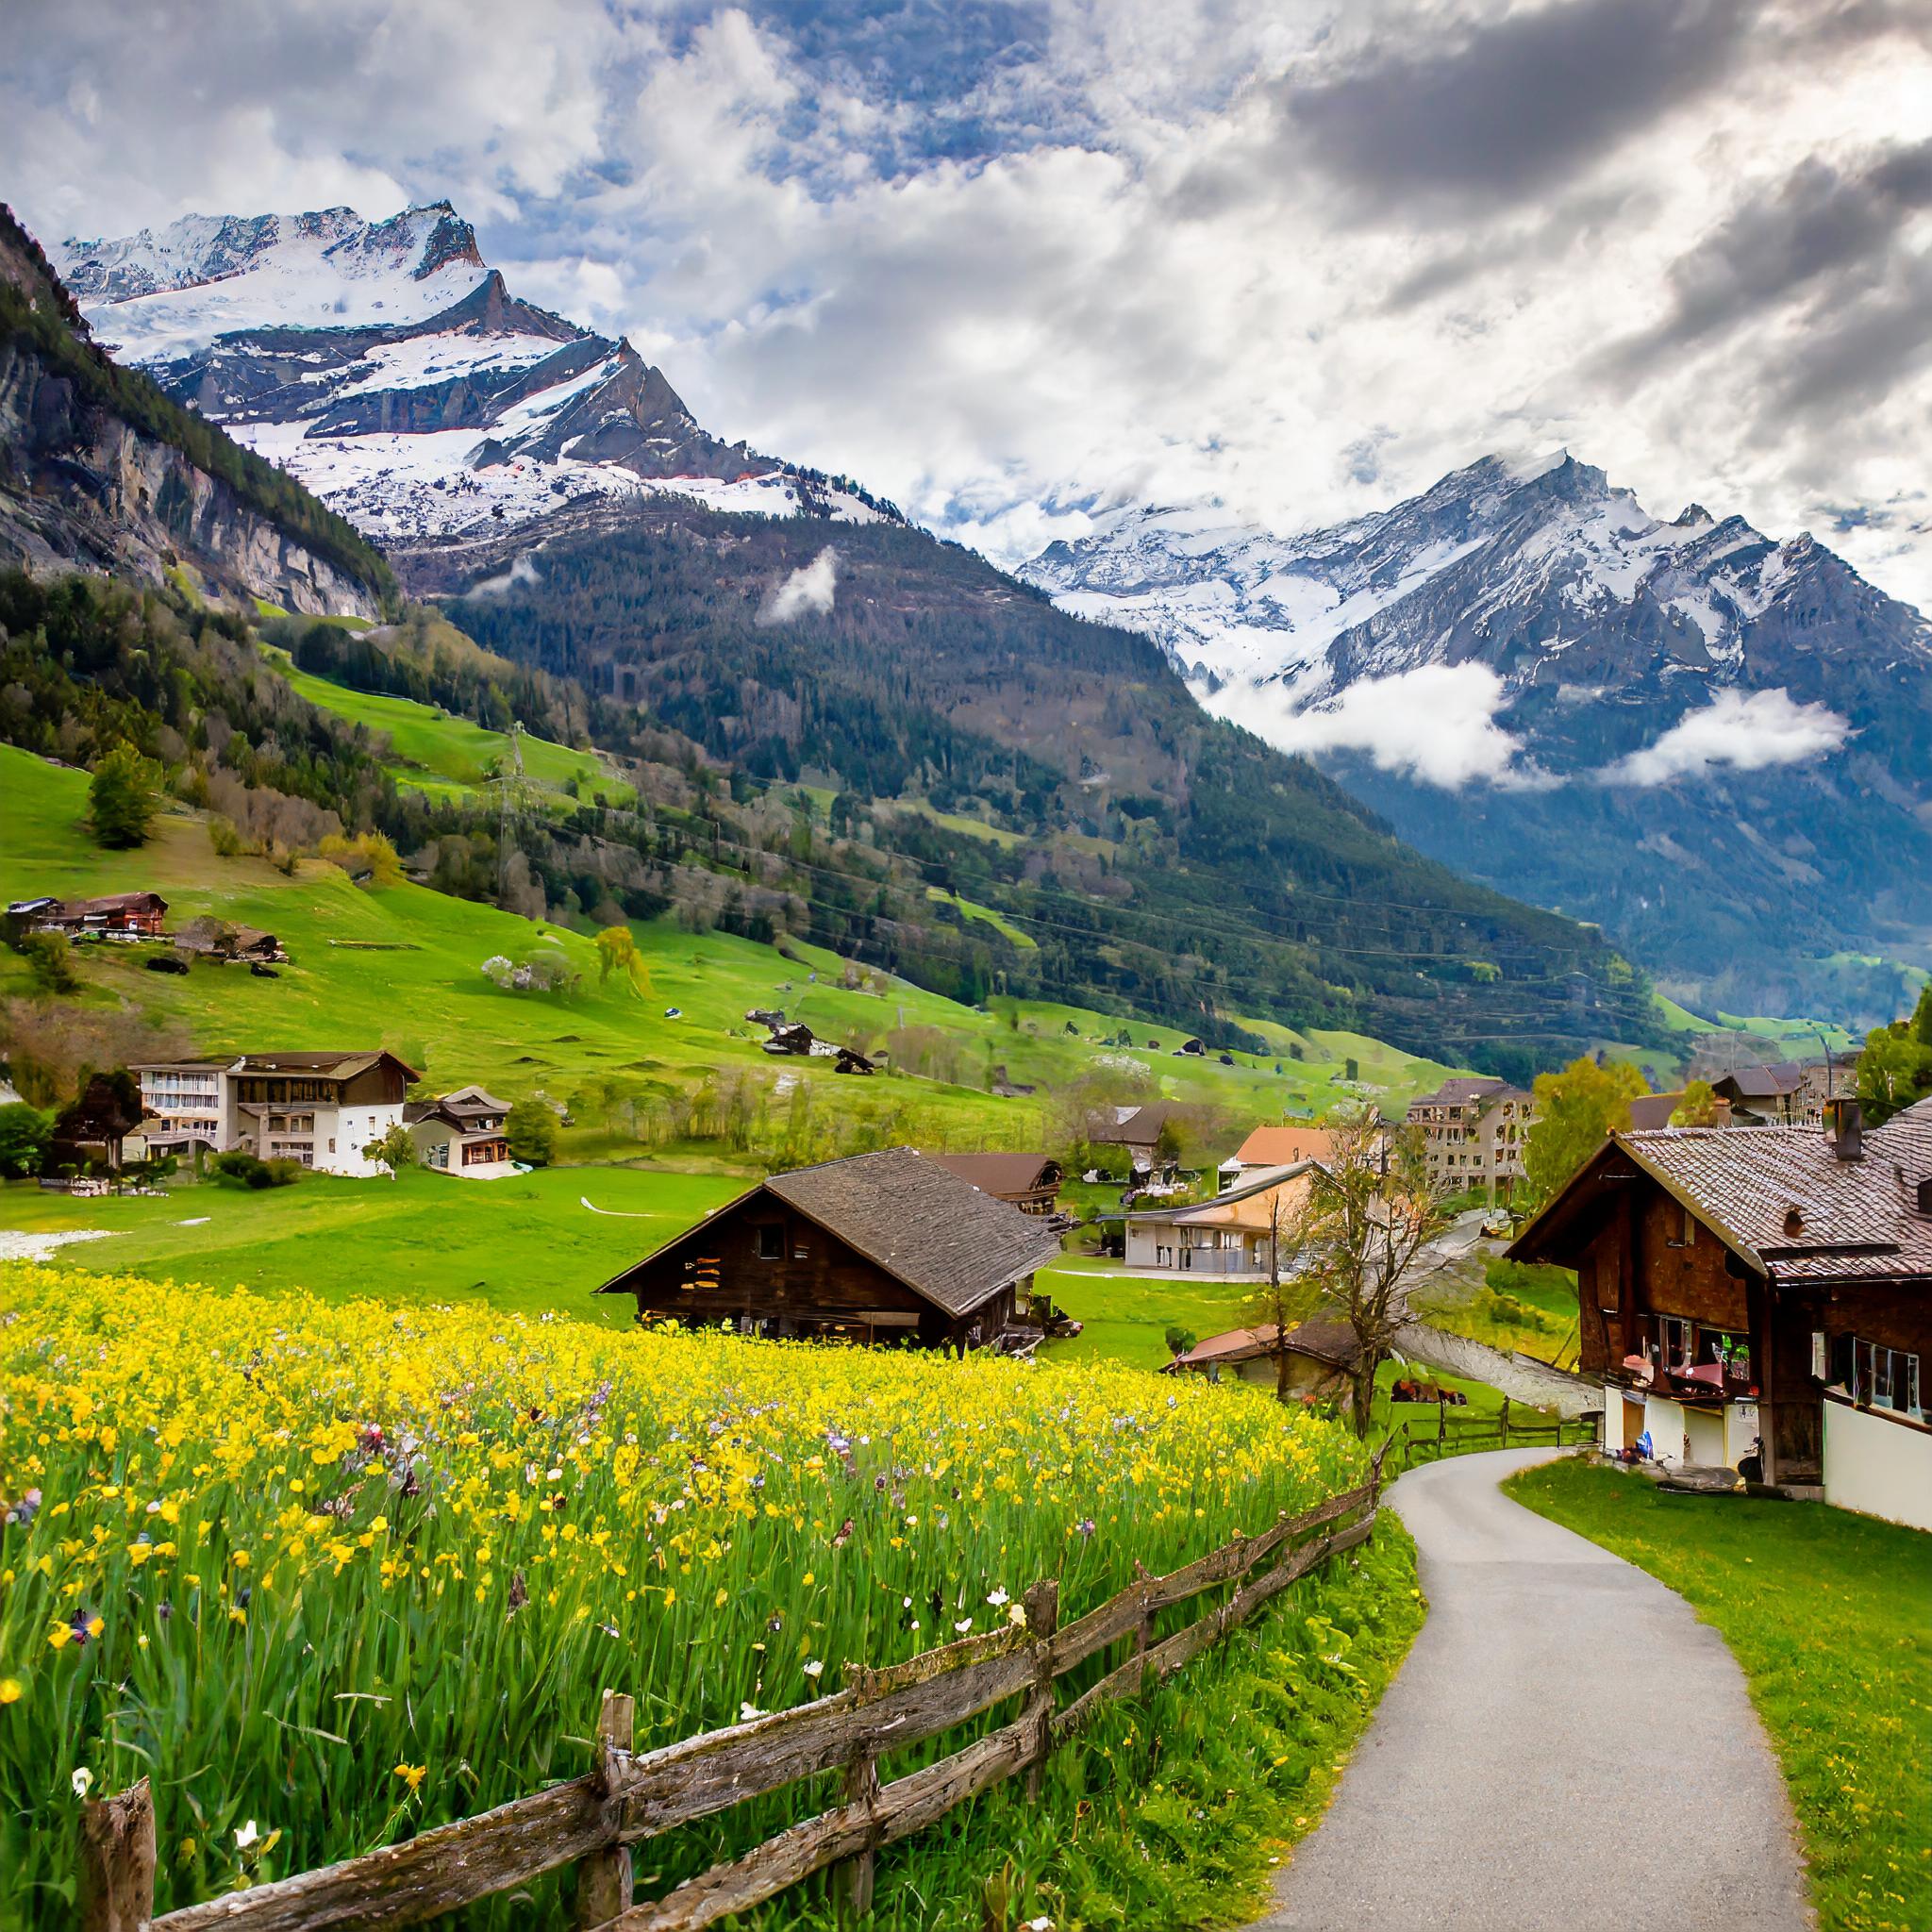  Firefly swiss alps village during spring time, mountains in the background, houses and paths, beautiful.jpg